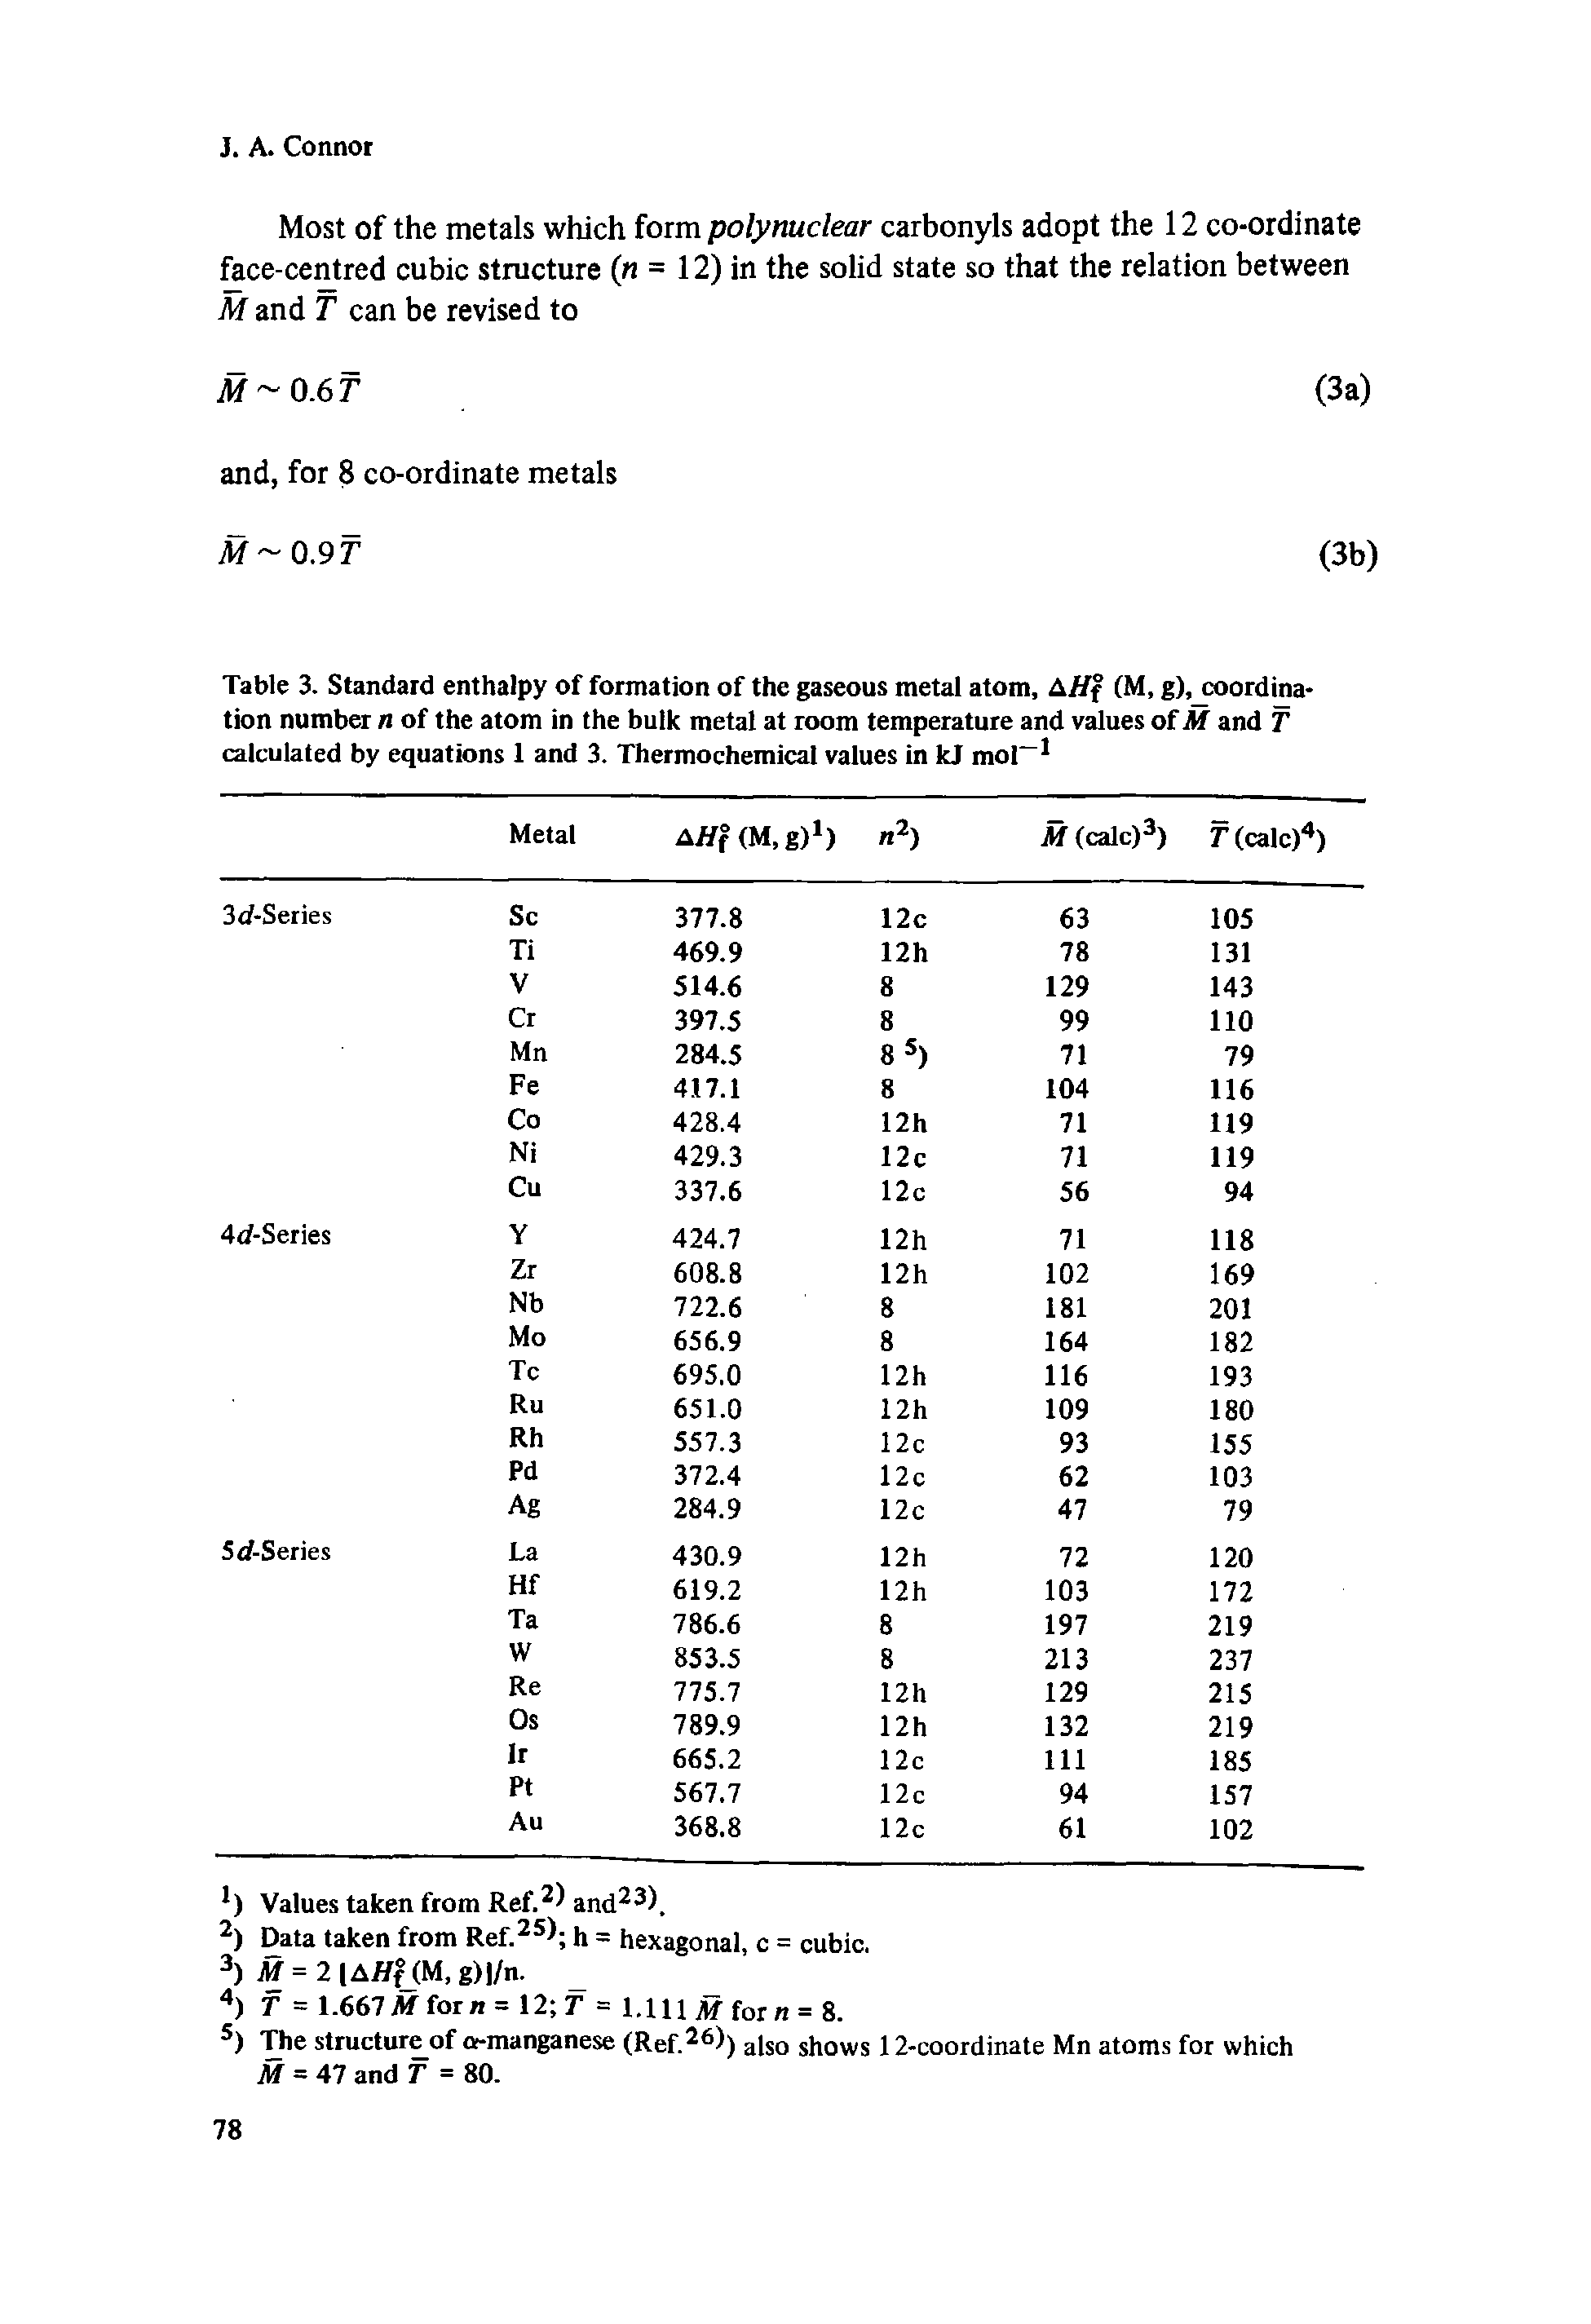 Table 3. Standard enthalpy of formation of the gaseous metal atom, A/ff (M, g), coordina-tion number n of the atom in the bulk metal at room temperature and values of M and T calculated by equations 1 and 3. Thermochemical values in kj mol-1...